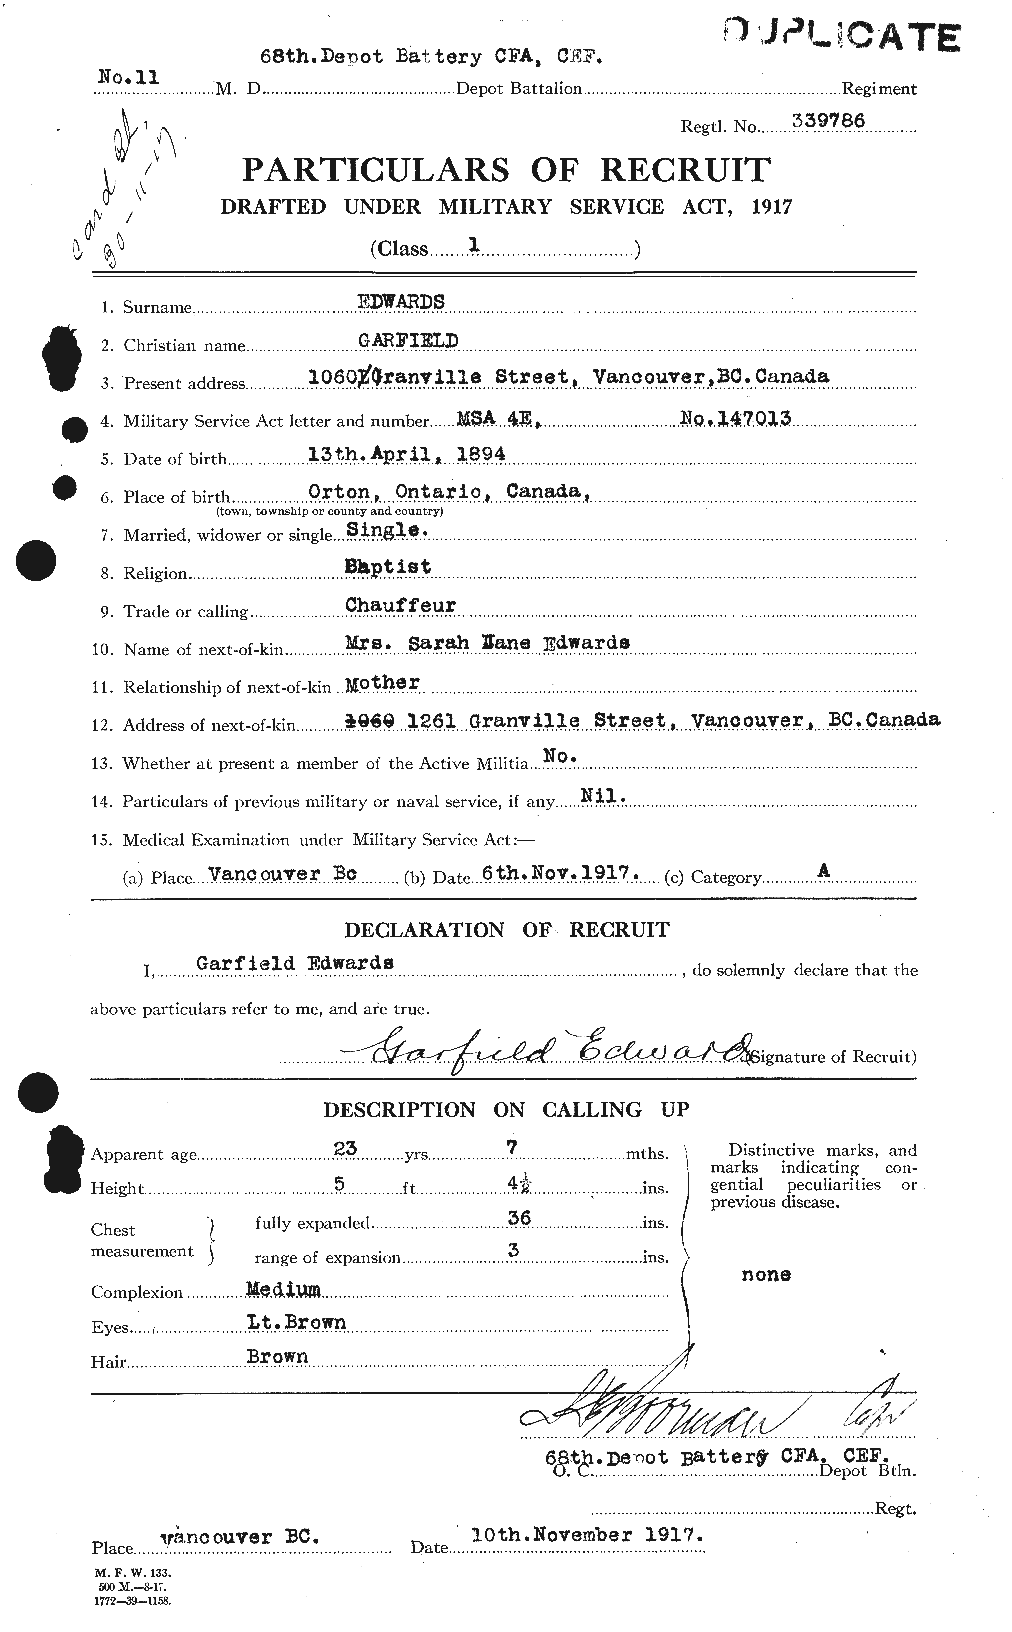 Personnel Records of the First World War - CEF 309087a